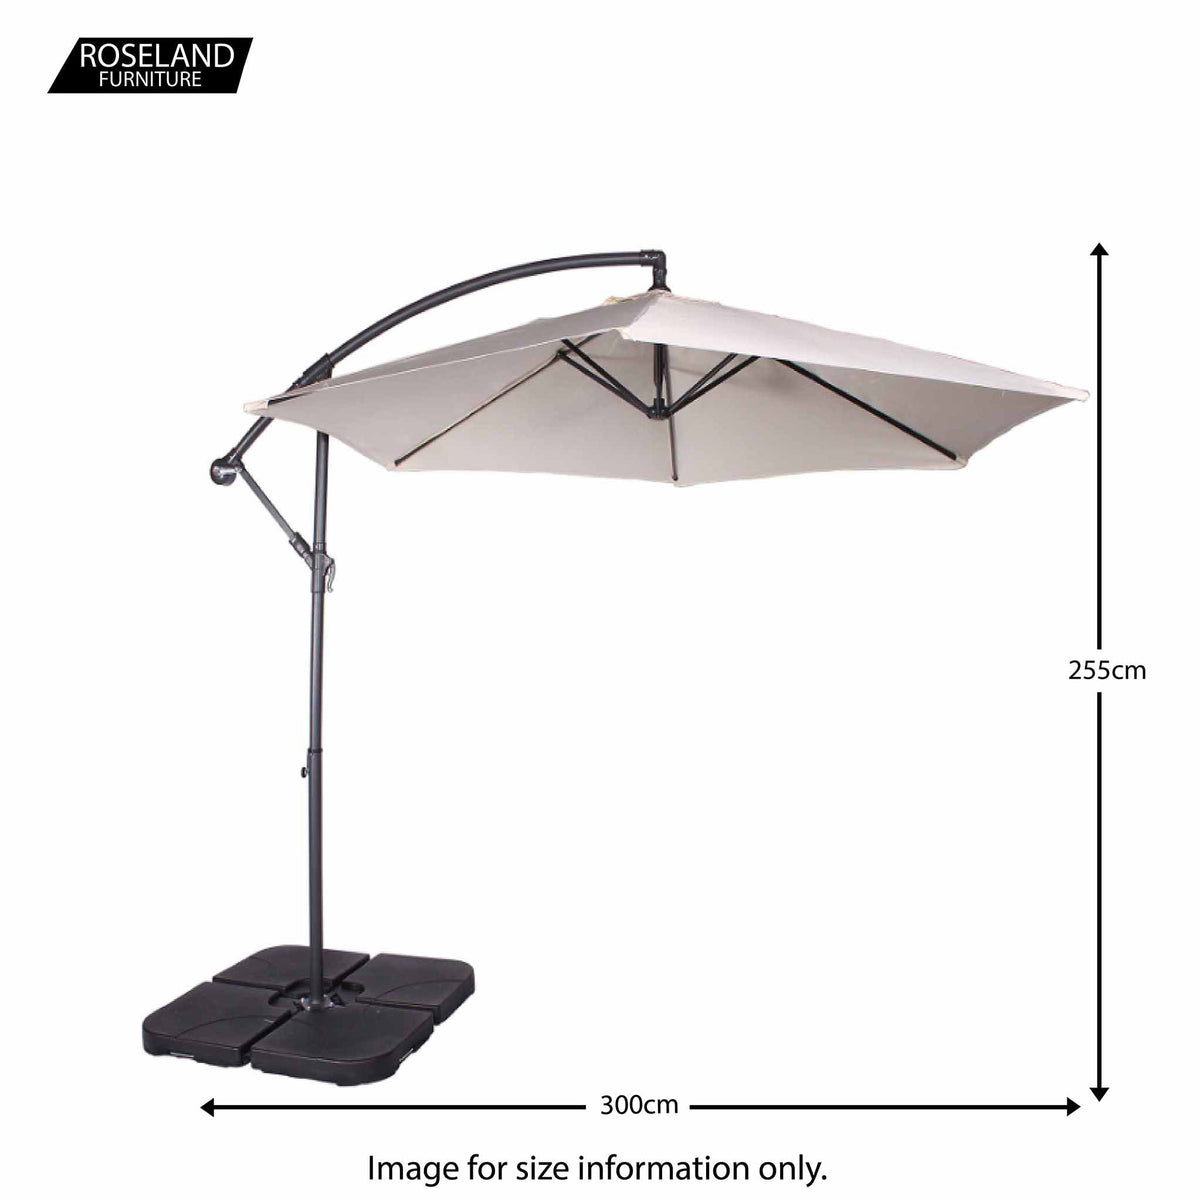 3m Cantilever Parasol in Ivory - Size Guide